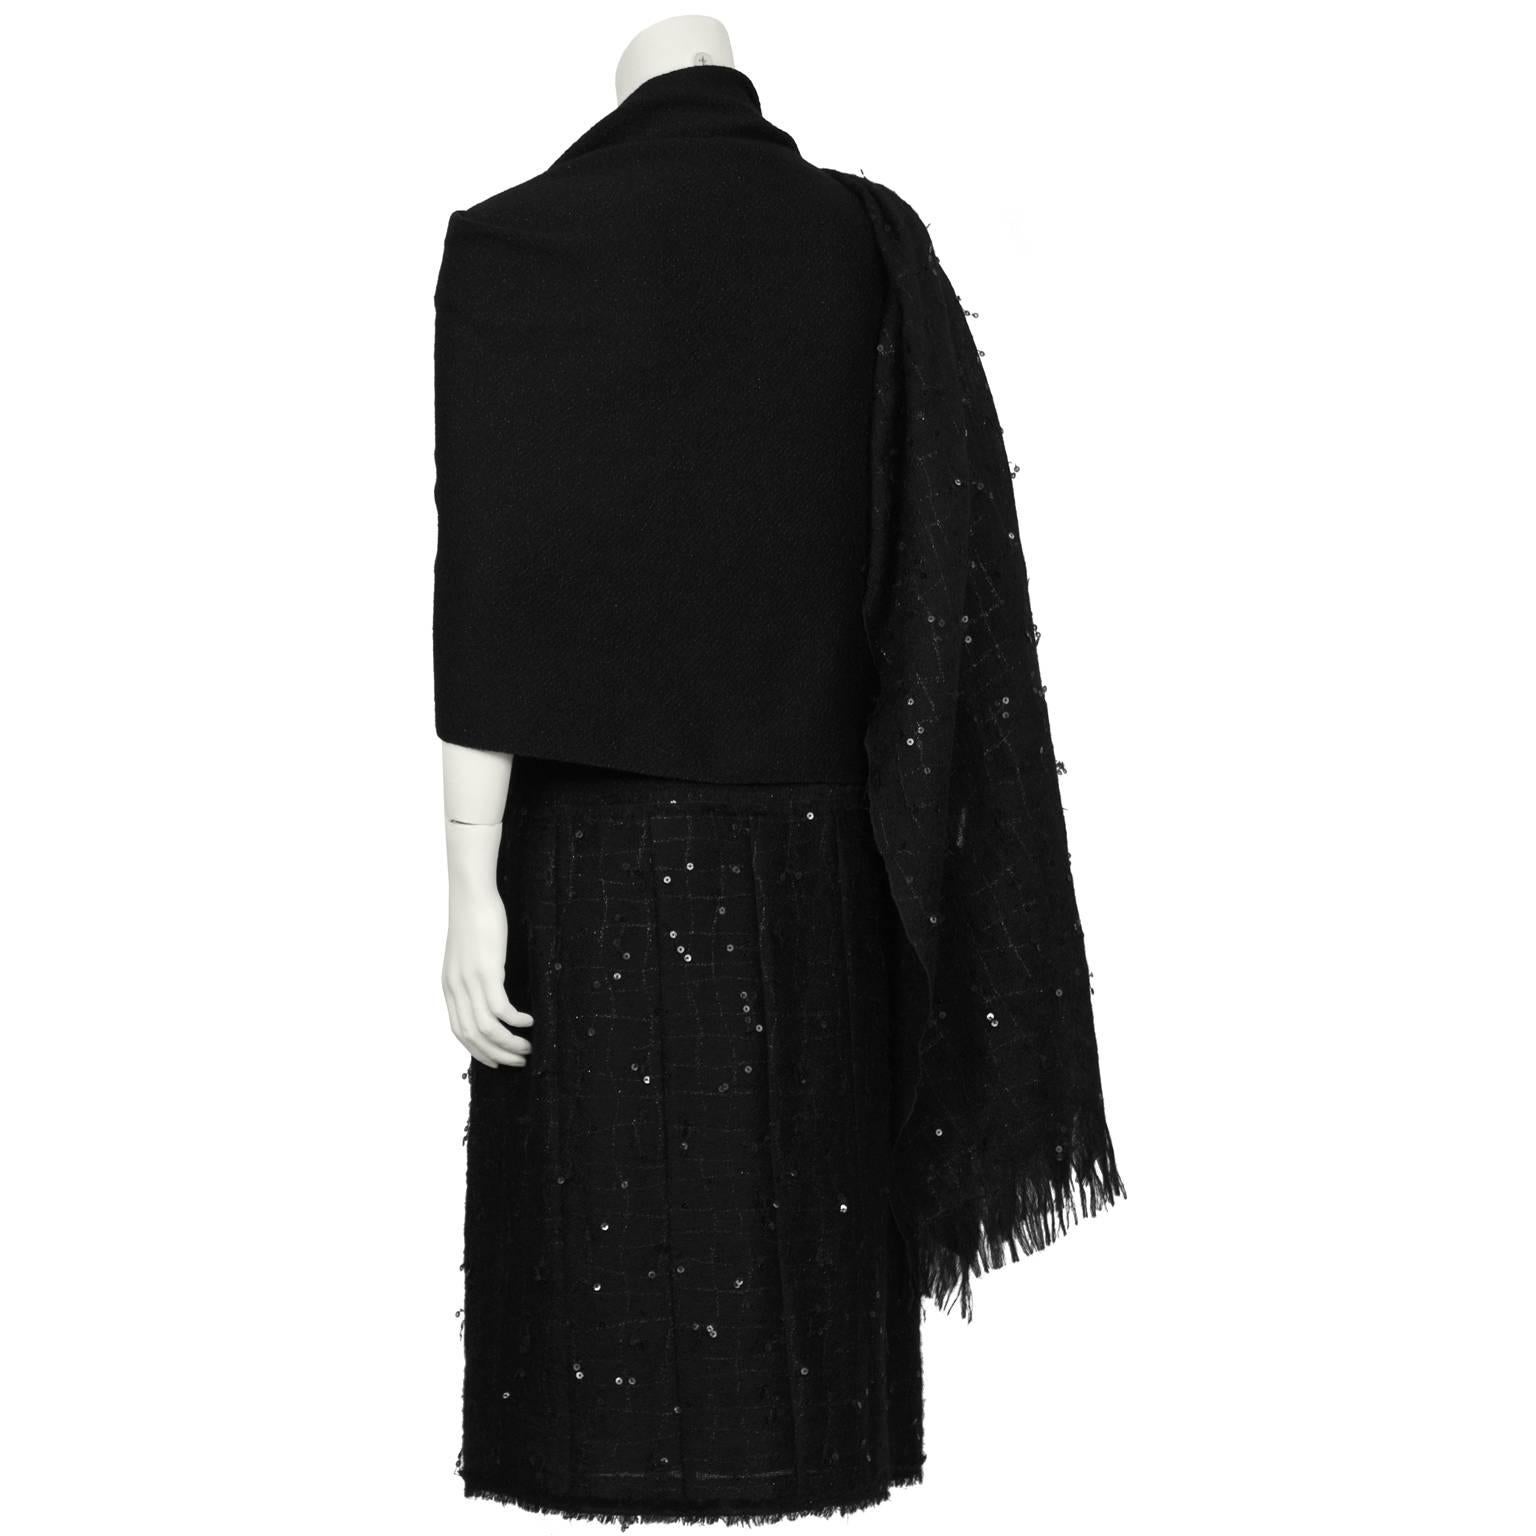 Women's Fall 2004 Chanel Black Knit Sequin Dress with Matching Shawl